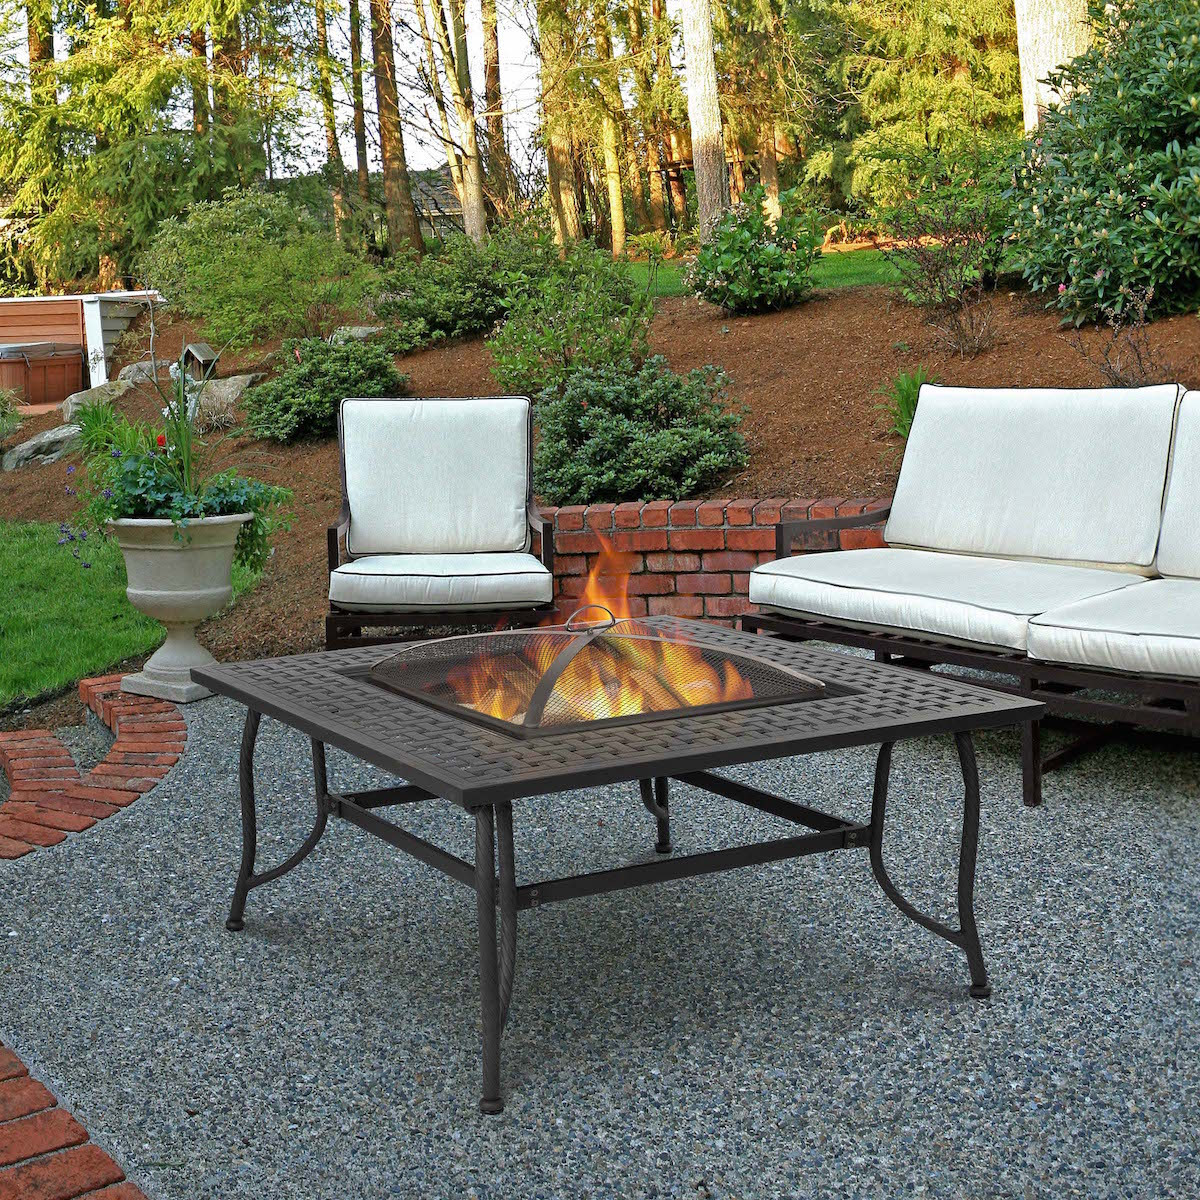 Patio Table With Fire Pit
 Real Flame Chelsea Wood Burning Outdoor Fire Pit Table